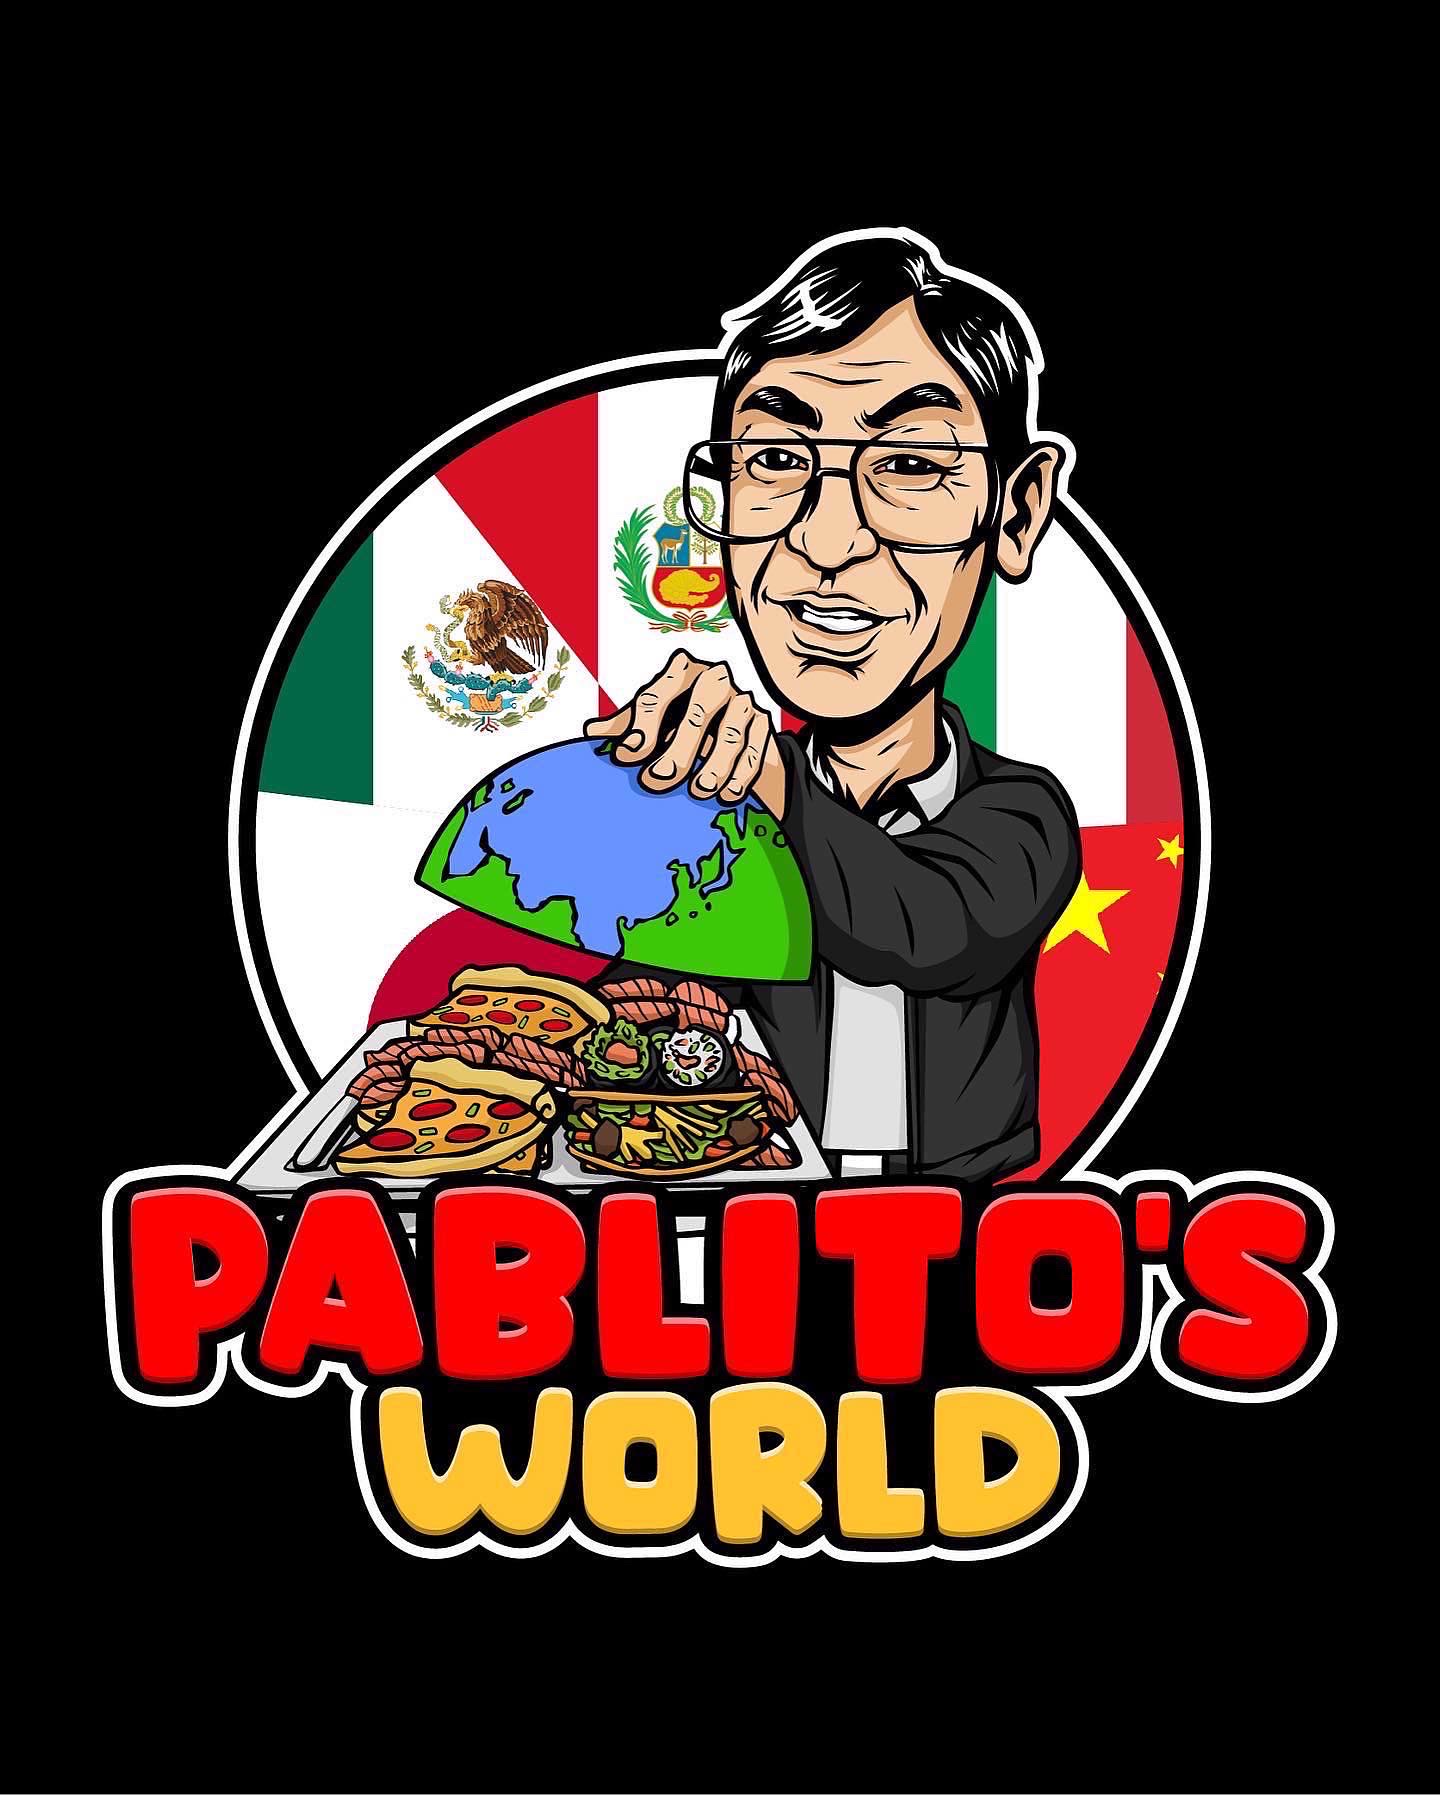 Mastermind Behind Los Angeles’s Iconic Pablito’s Tacos Unveils Pablito’s World, A Fresh Take on the Food Court